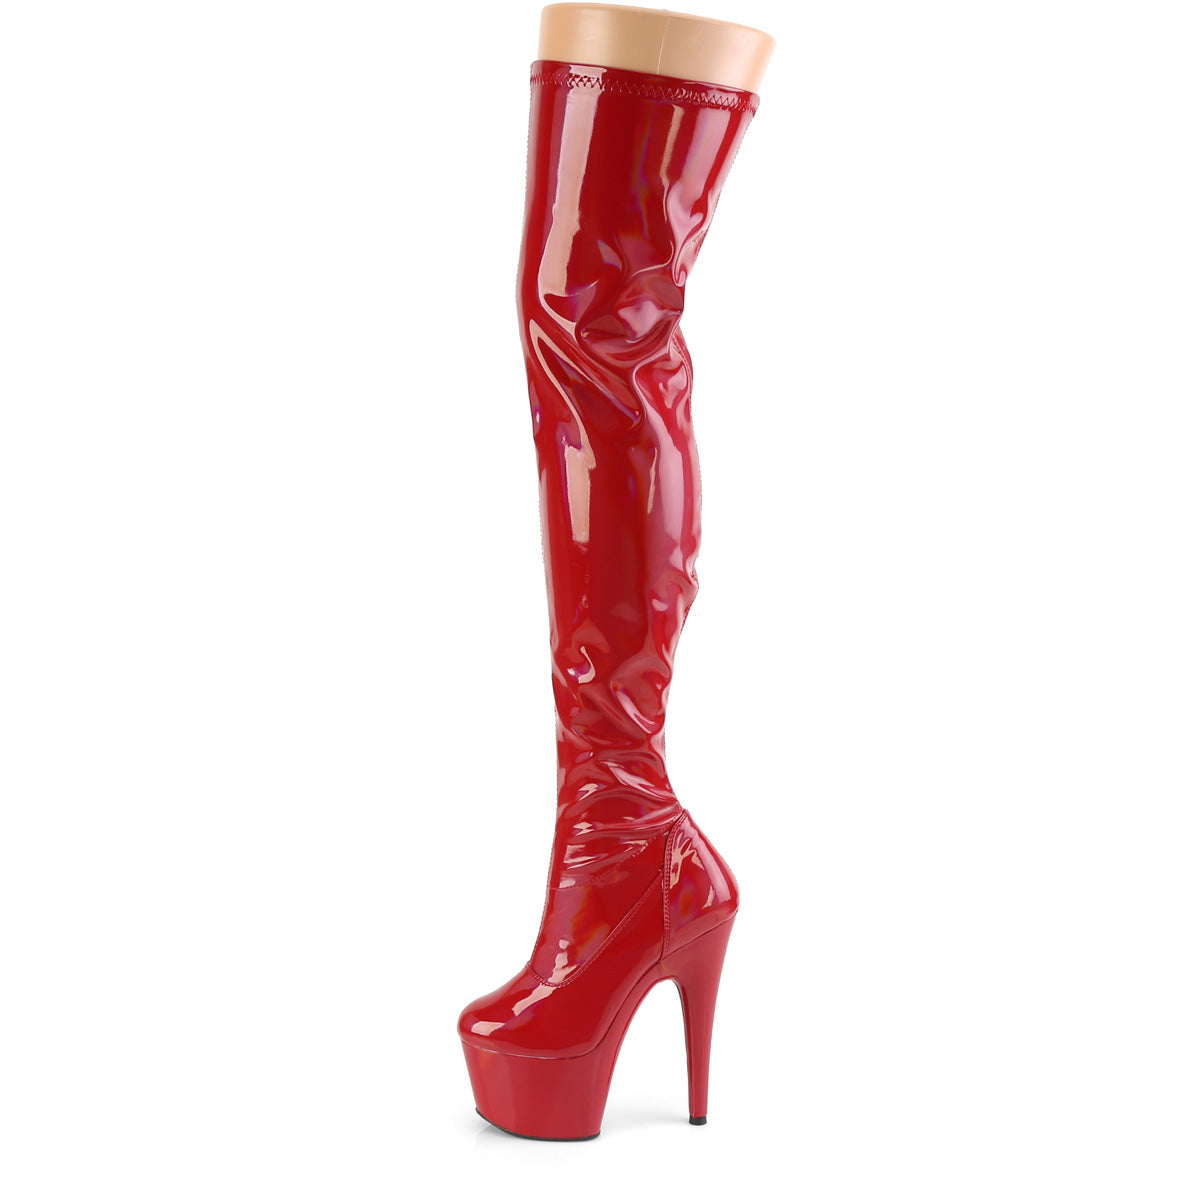 ADORE-3000HWR Pleaser 7" Heel Red Pole Dancing Thigh Highs-Pleaser- Sexy Shoes Pole Dance Heels